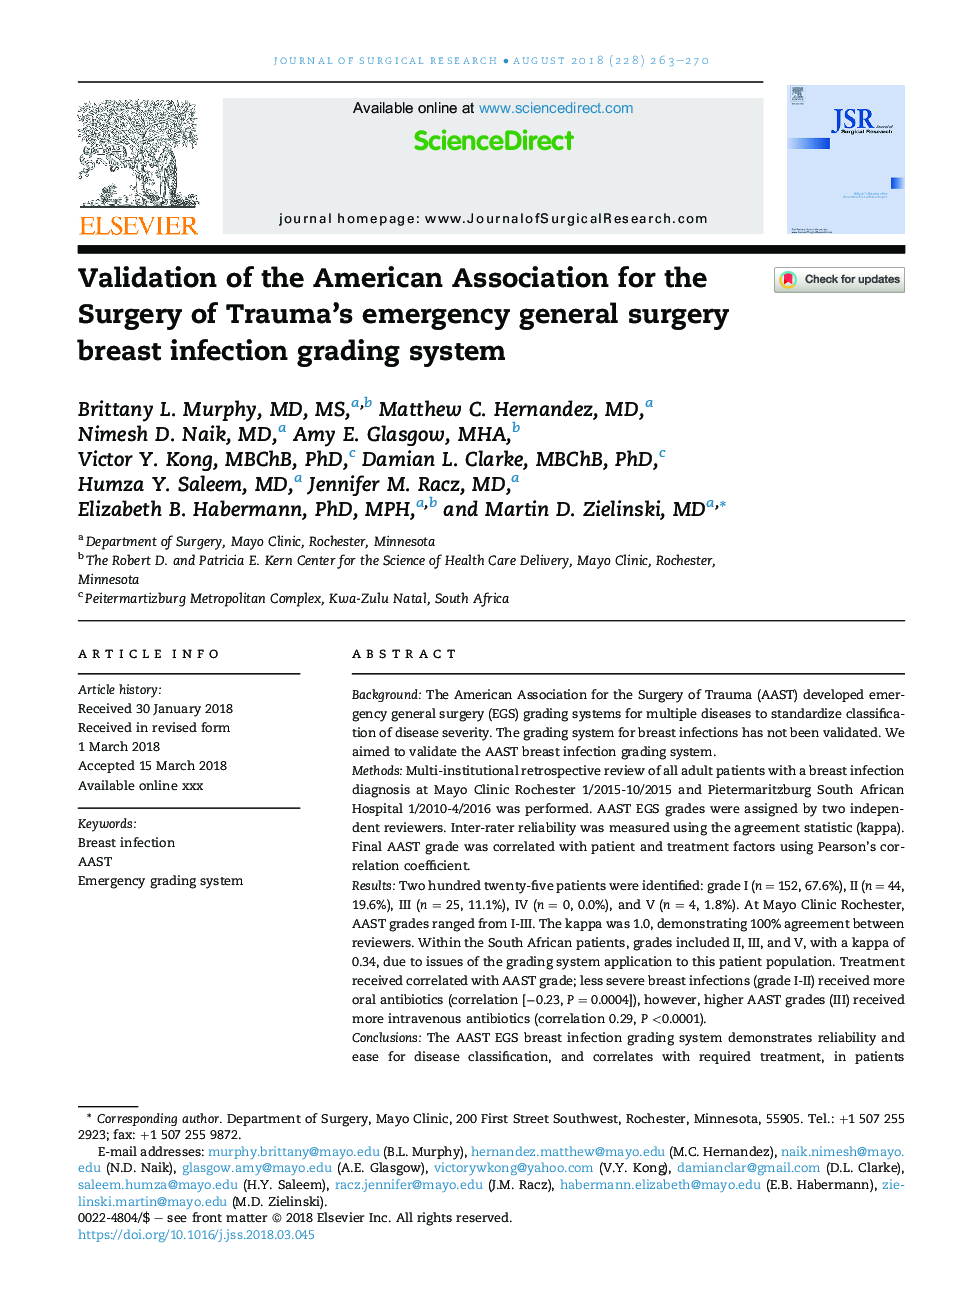 Validation of the American Association for the Surgery of Trauma's emergency general surgery breast infection grading system